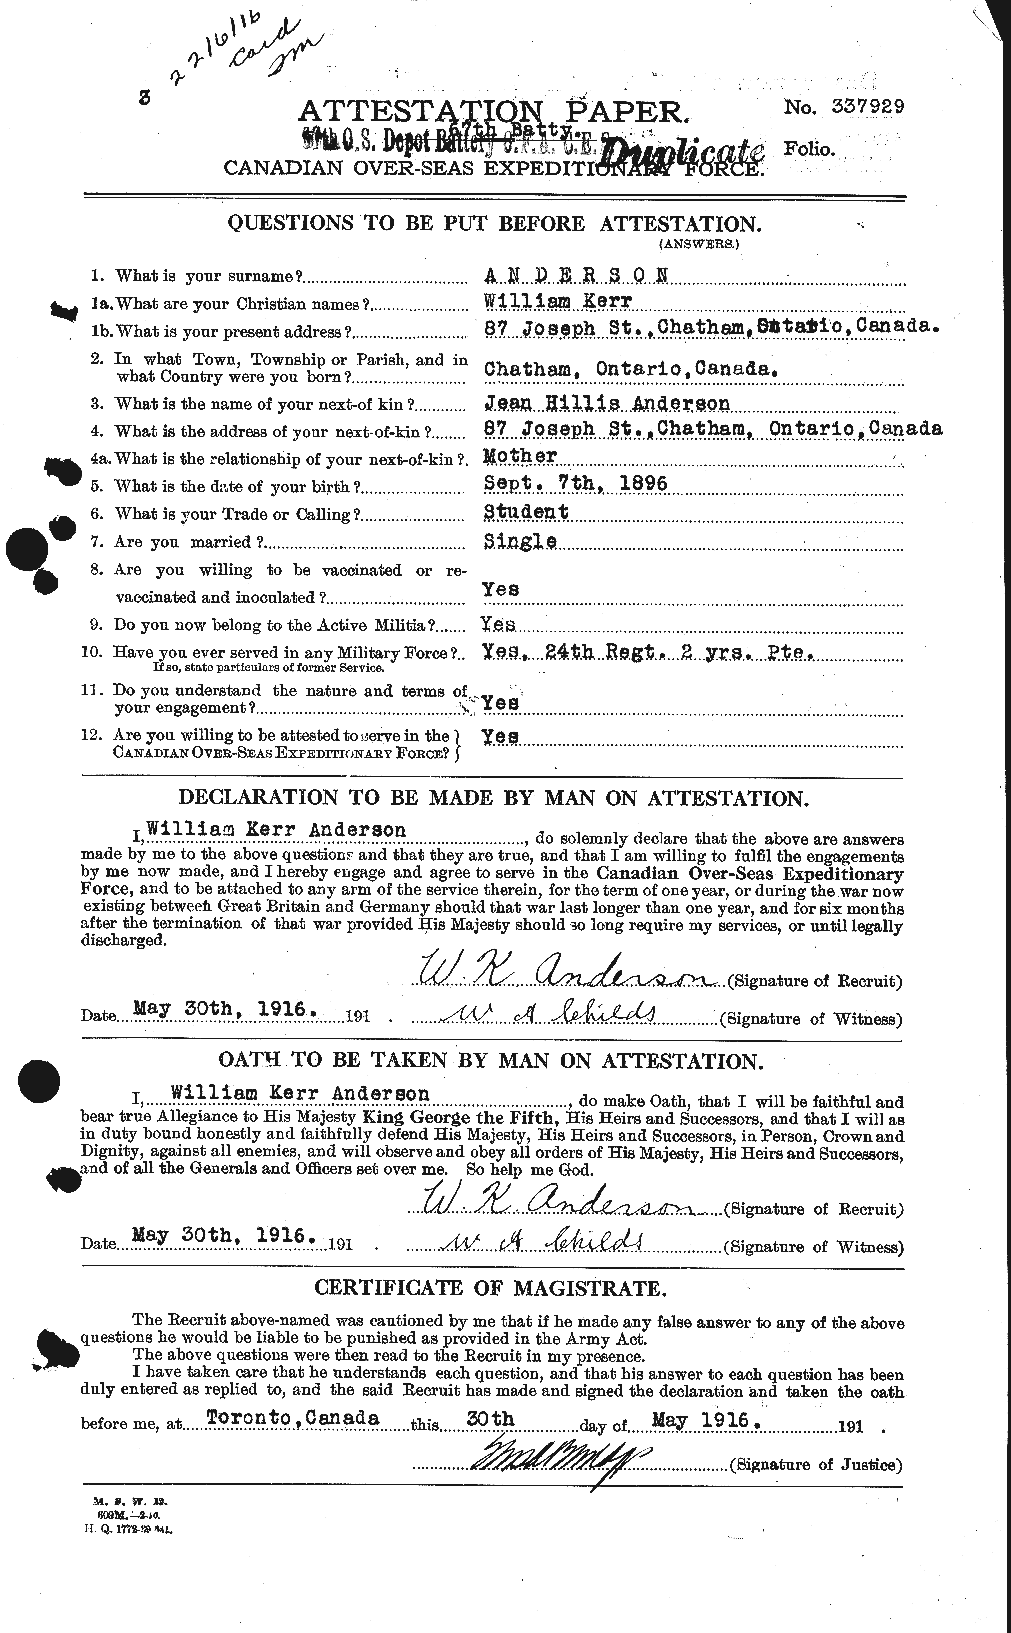 Personnel Records of the First World War - CEF 210689a